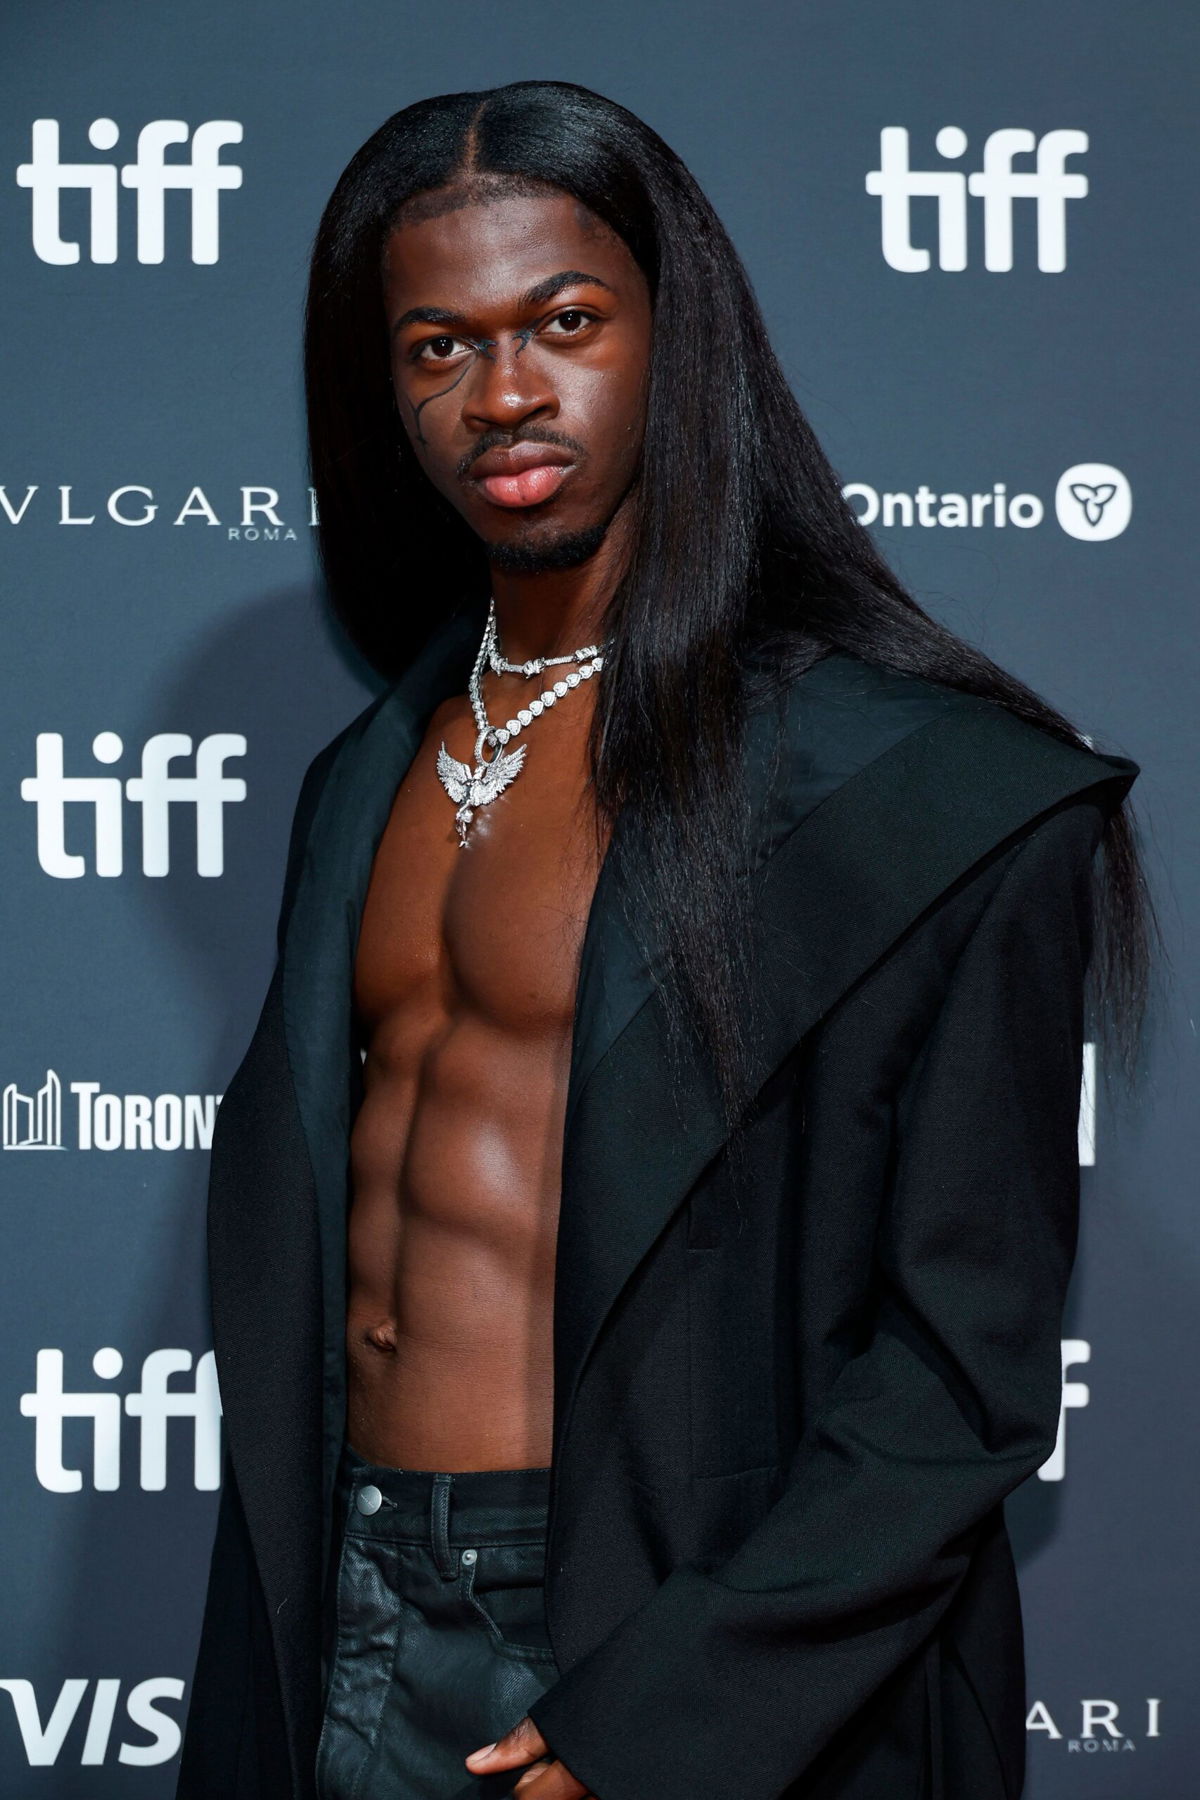 <i>Frazer Harrison/Getty Images</i><br/>Lil Nas X at the Toronto Film Festival premiere of 'Lil Nas X: Long Live Montero' on Saturday.